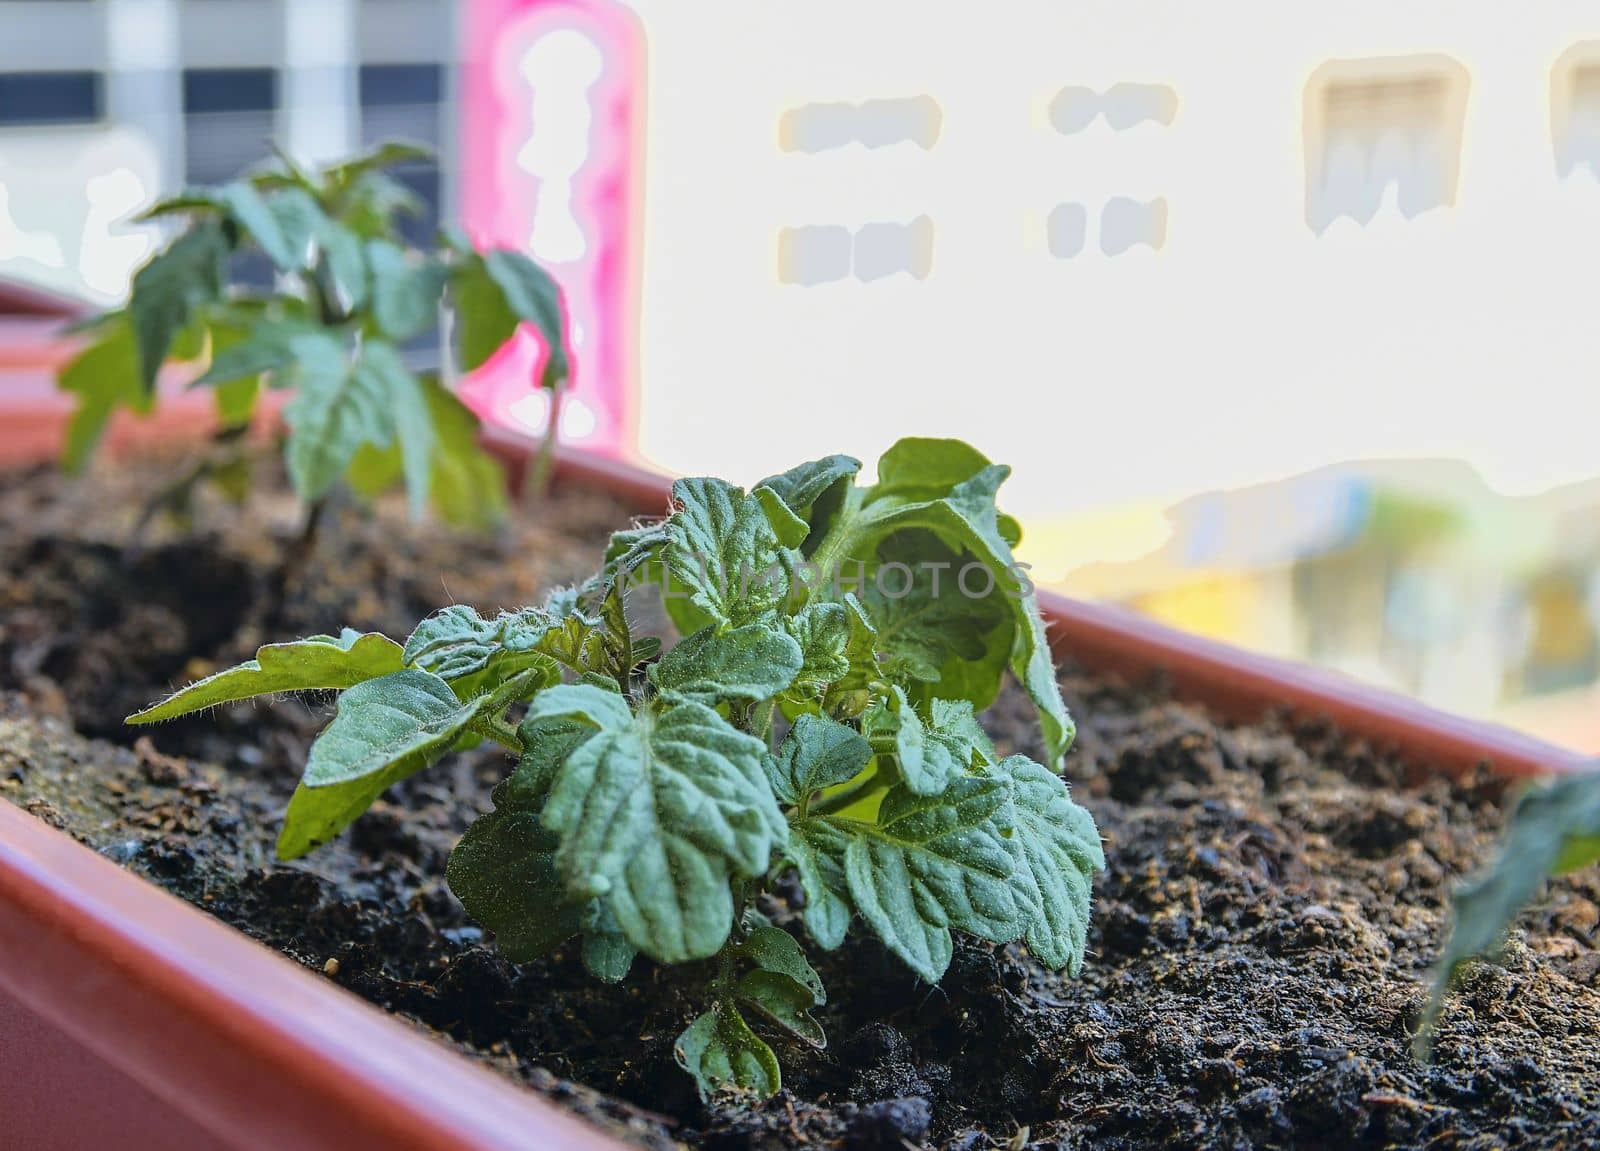 Planting and growing of dwarf tomatoes. Micro dwarf tomatoes in window box on windowsill. Garden and urban concept by roman_nerud